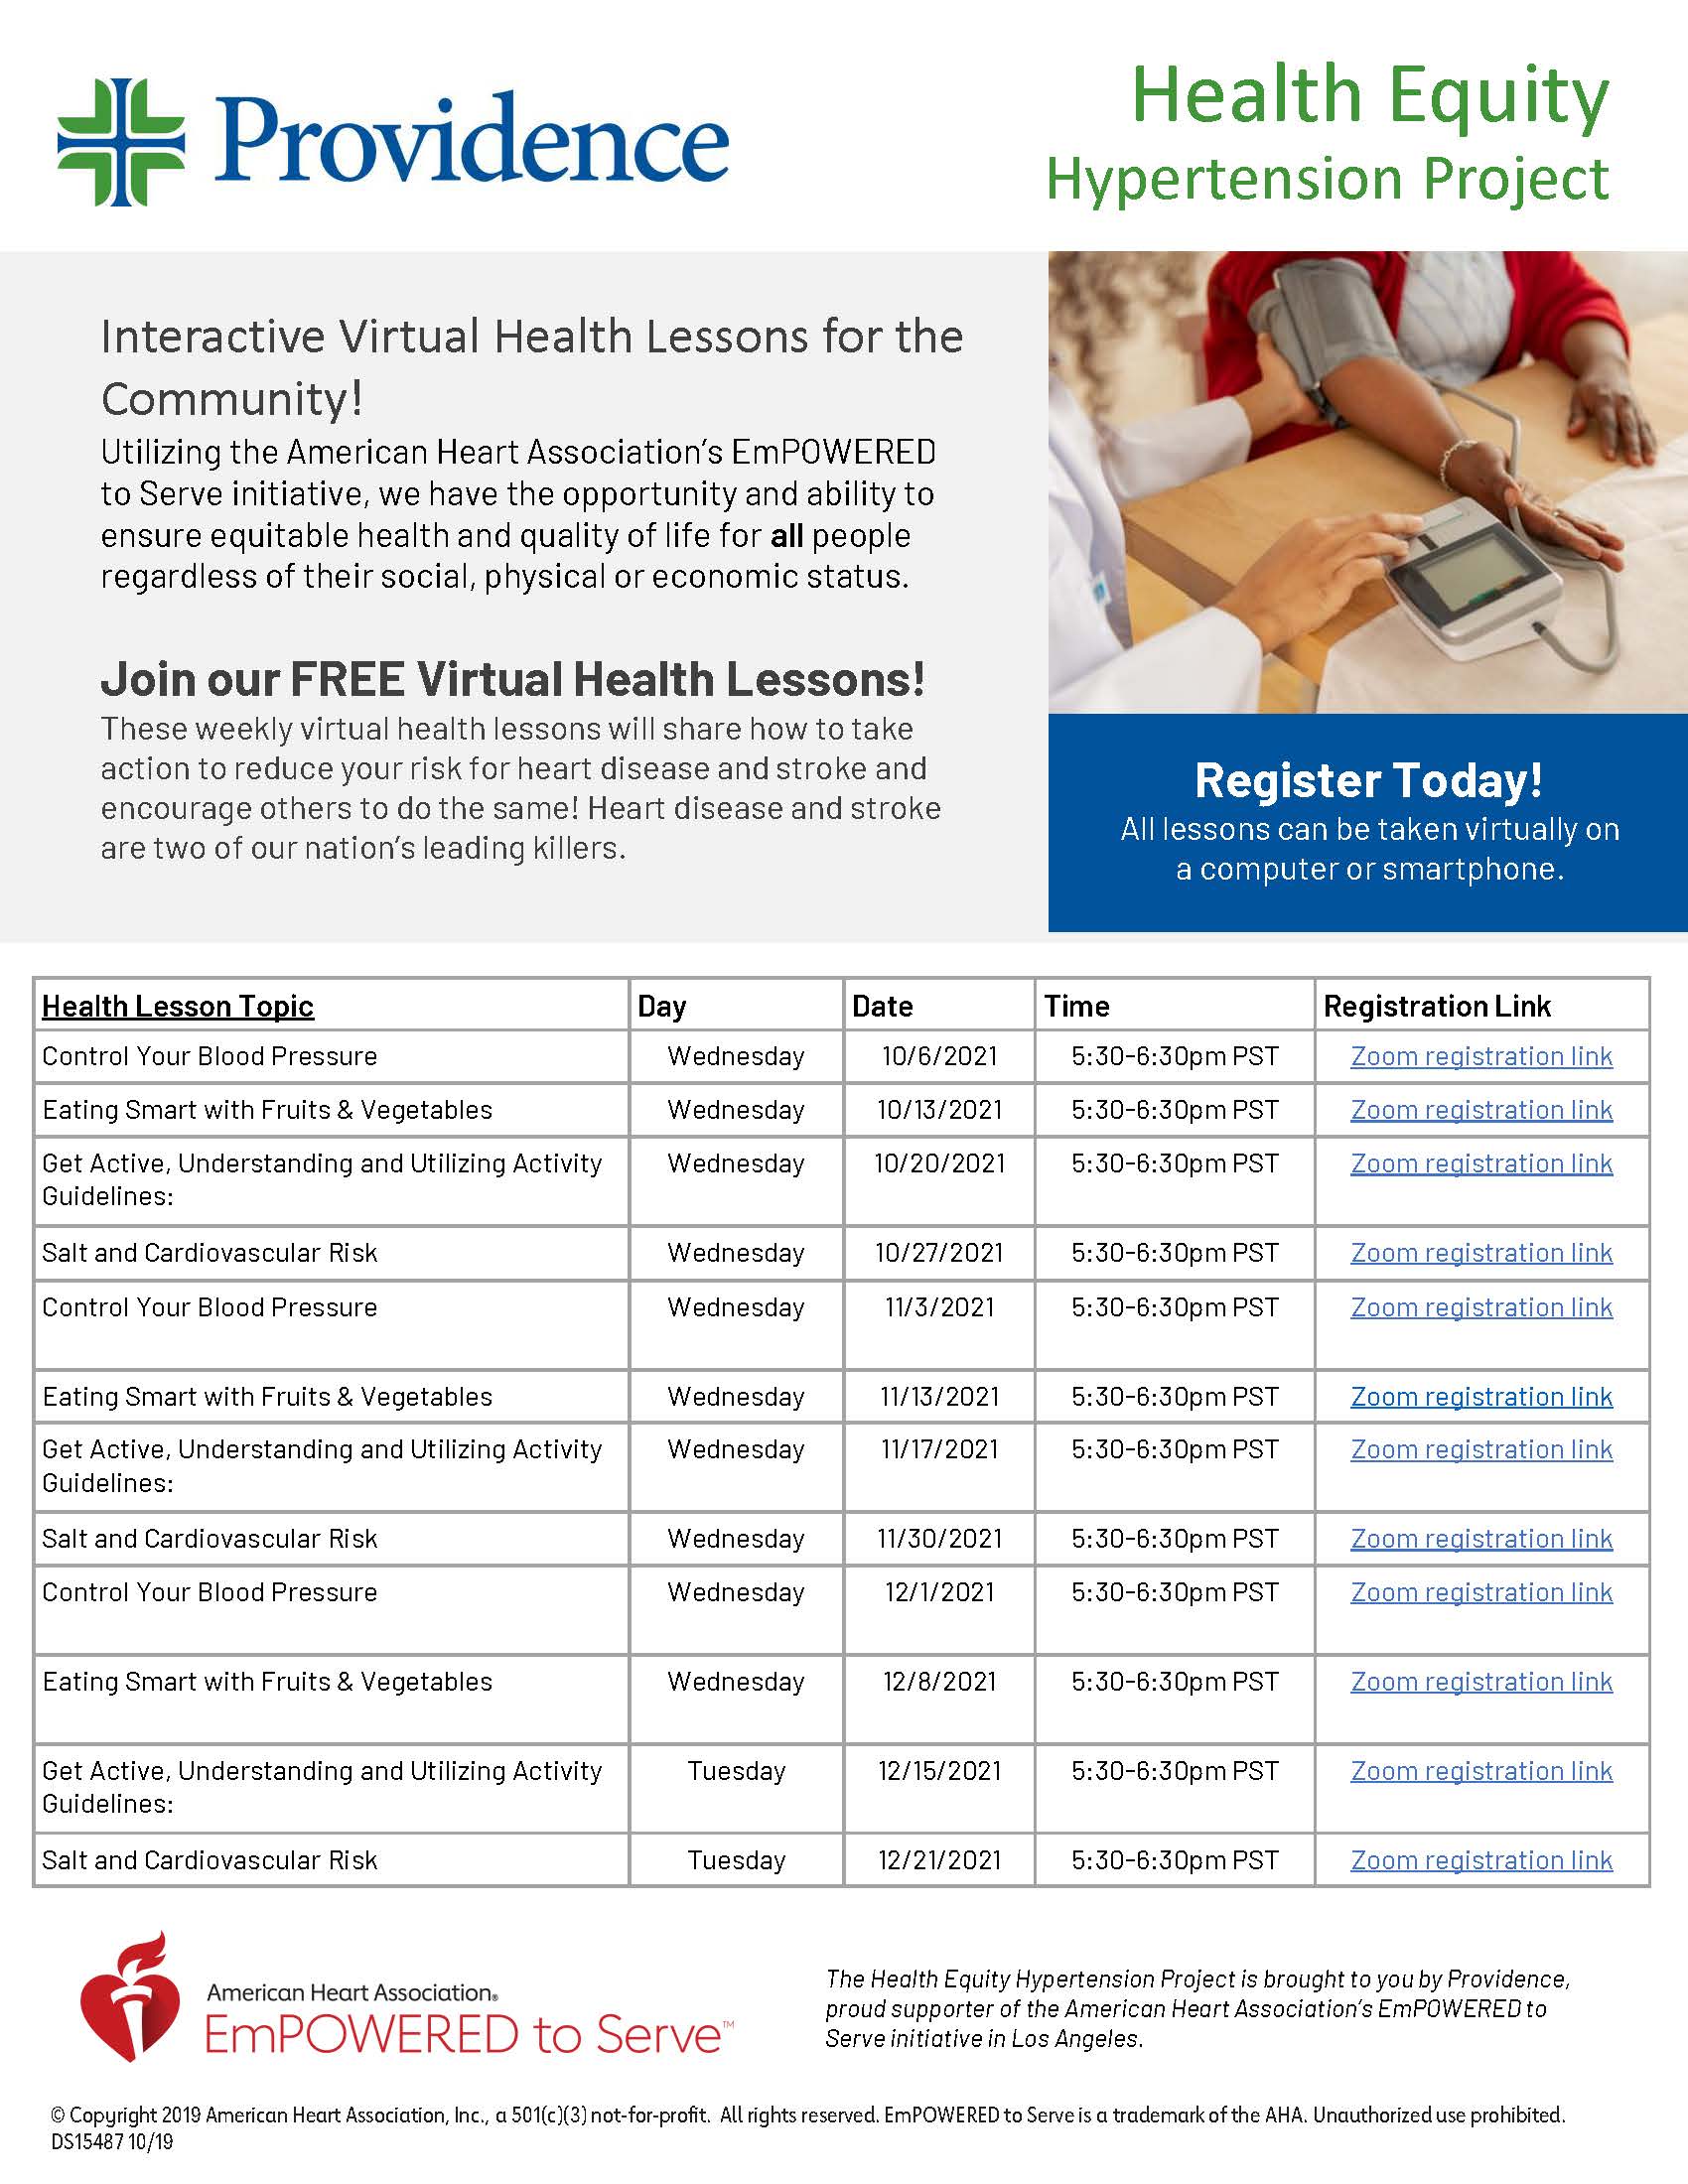 Providence_AHA-EmPOWERED-to-Serve-Virtual-Community-Health-Lessons